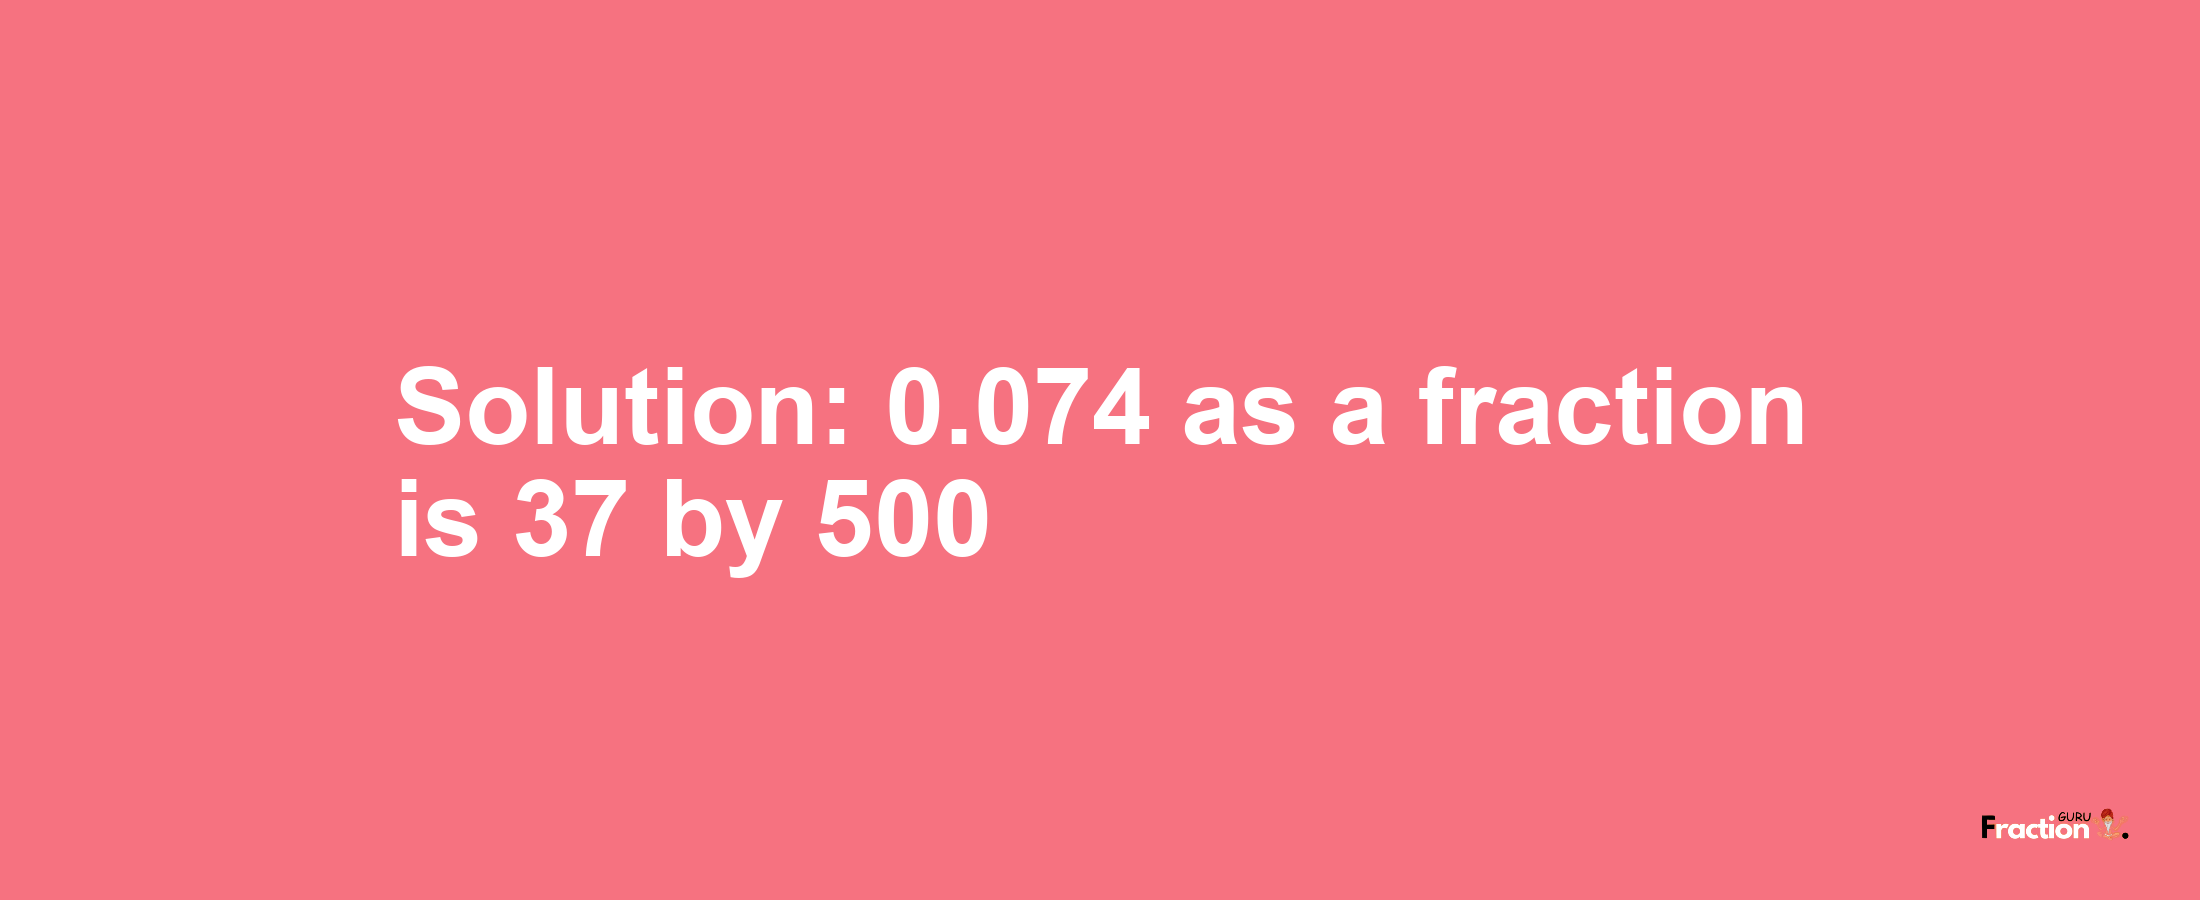 Solution:0.074 as a fraction is 37/500